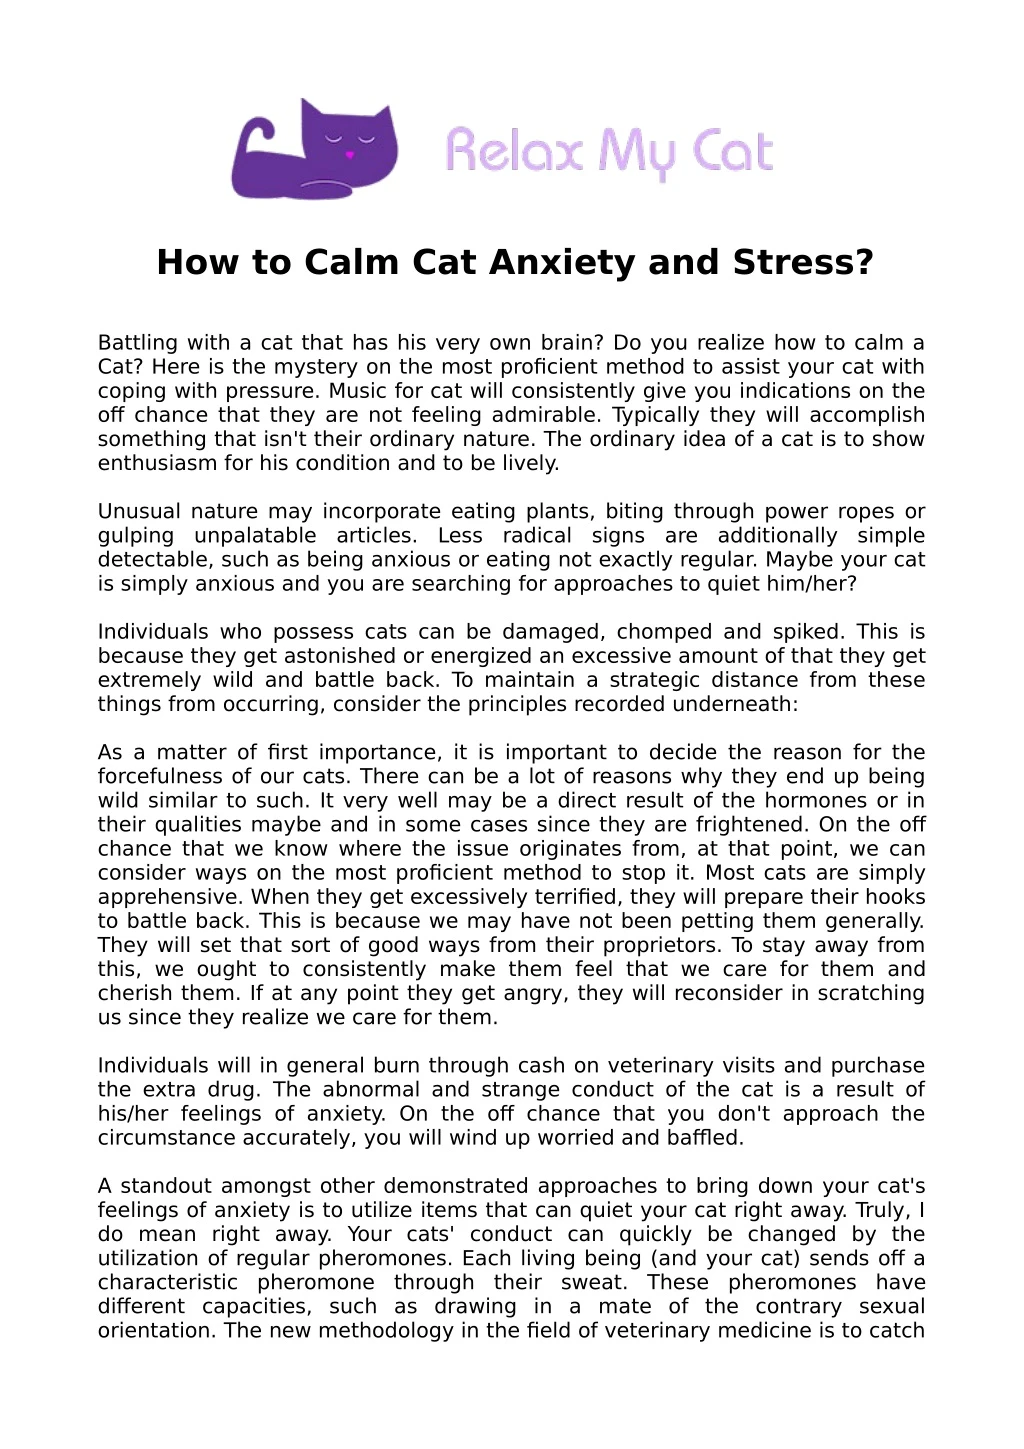 how to calm cat anxiety and stress